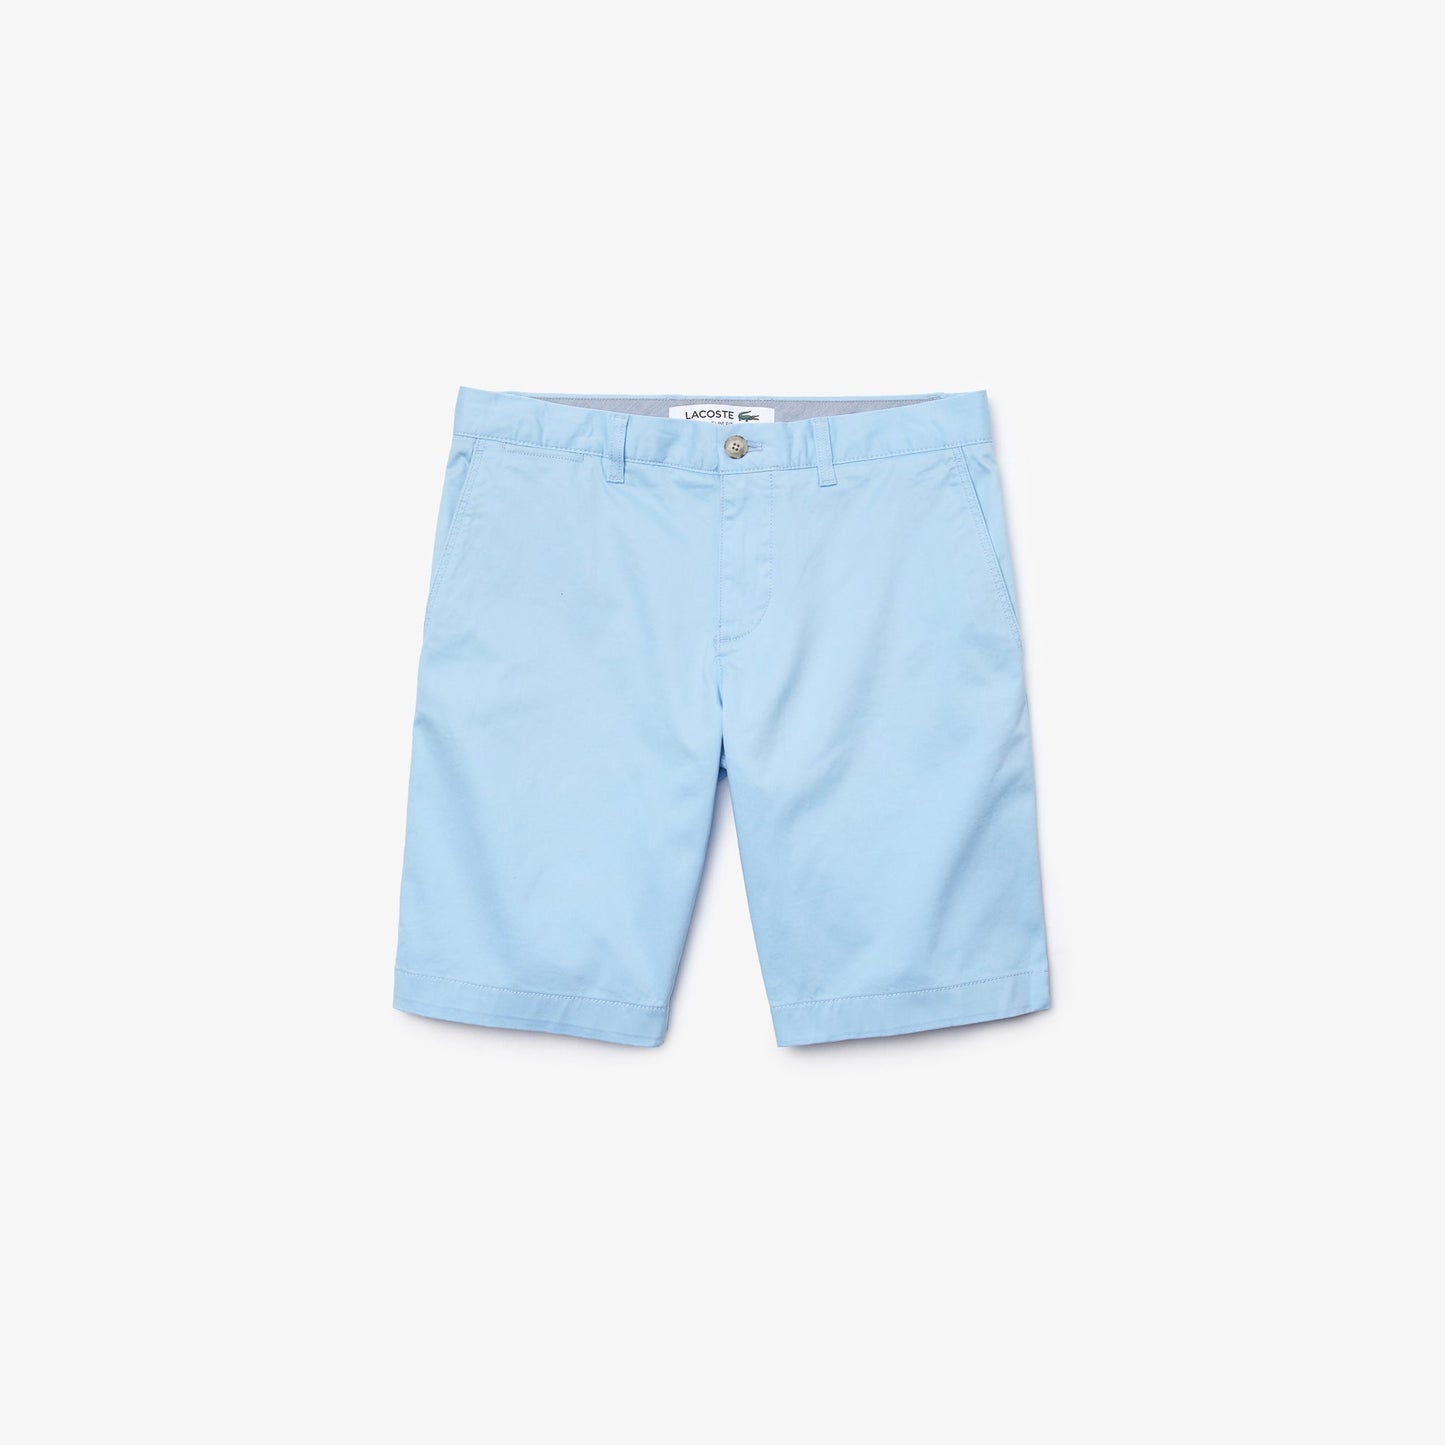 Shop The Latest Collection Of Lacoste Men'S Slim Fit Stretch Gabardine Bermuda Shorts - Fh9542 In Lebanon